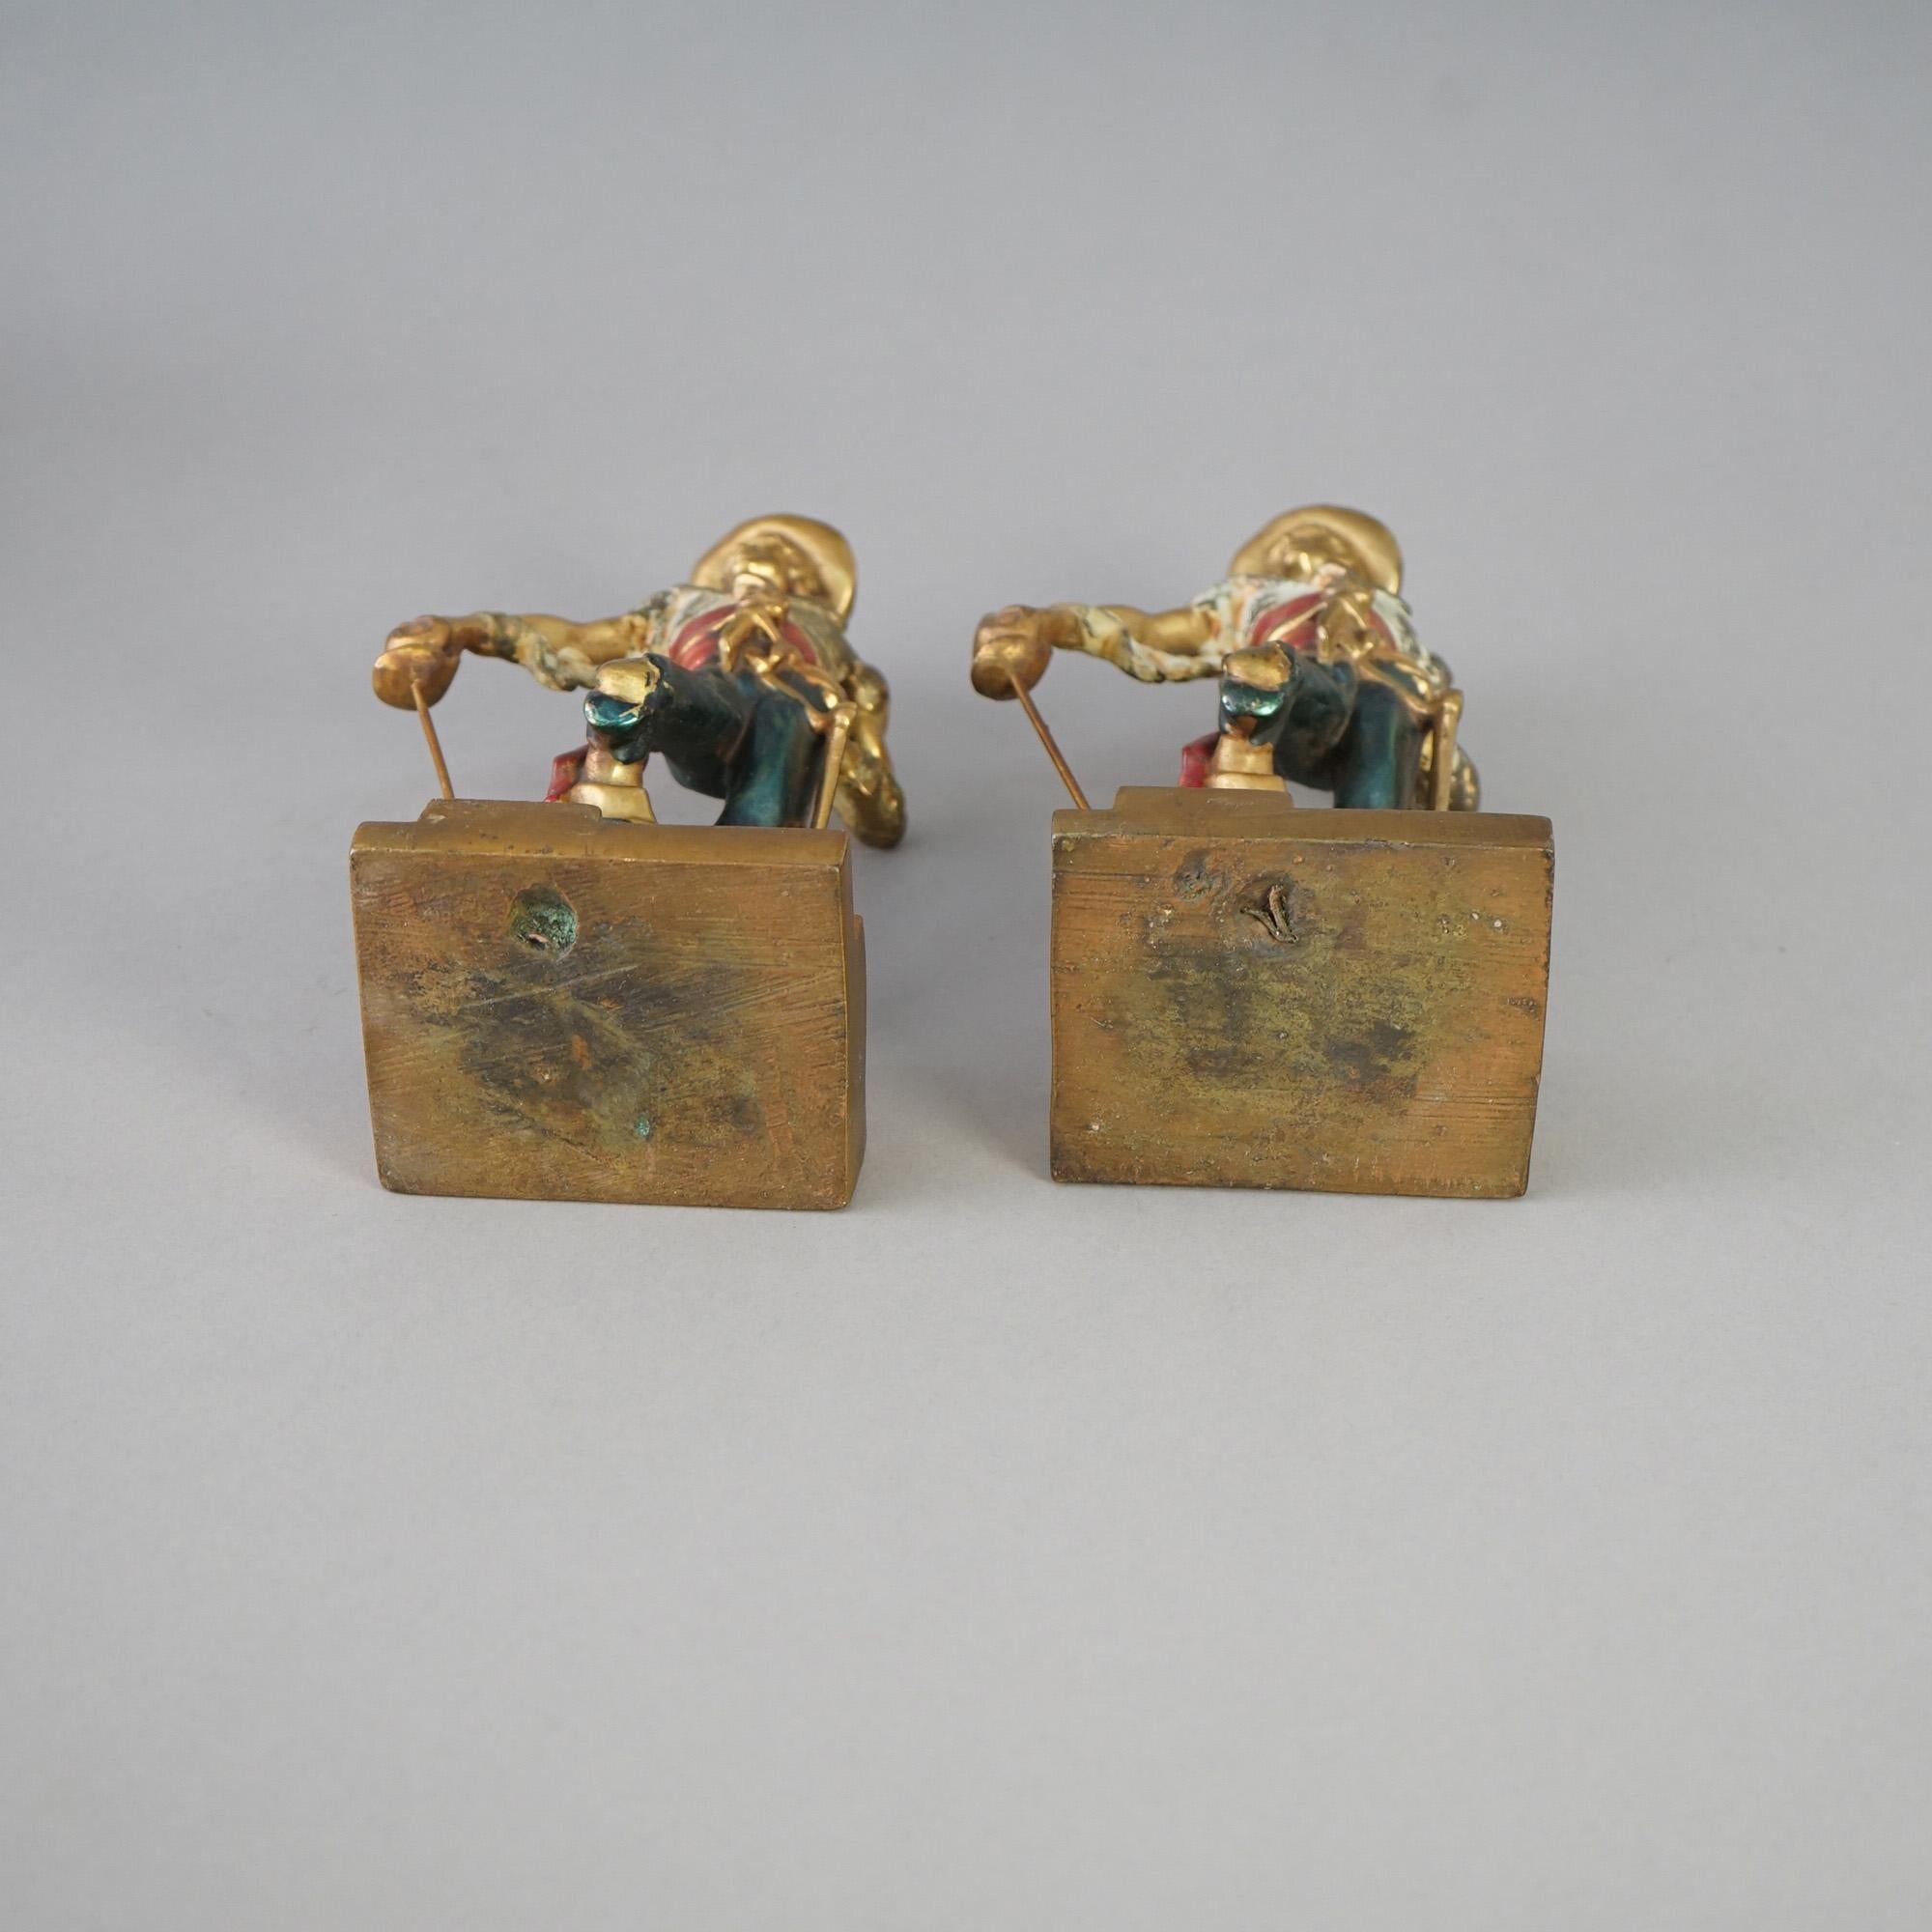 20th Century Antique Pair of Frankart School Polychromed Bronze Figural Pirate Bookends c1920